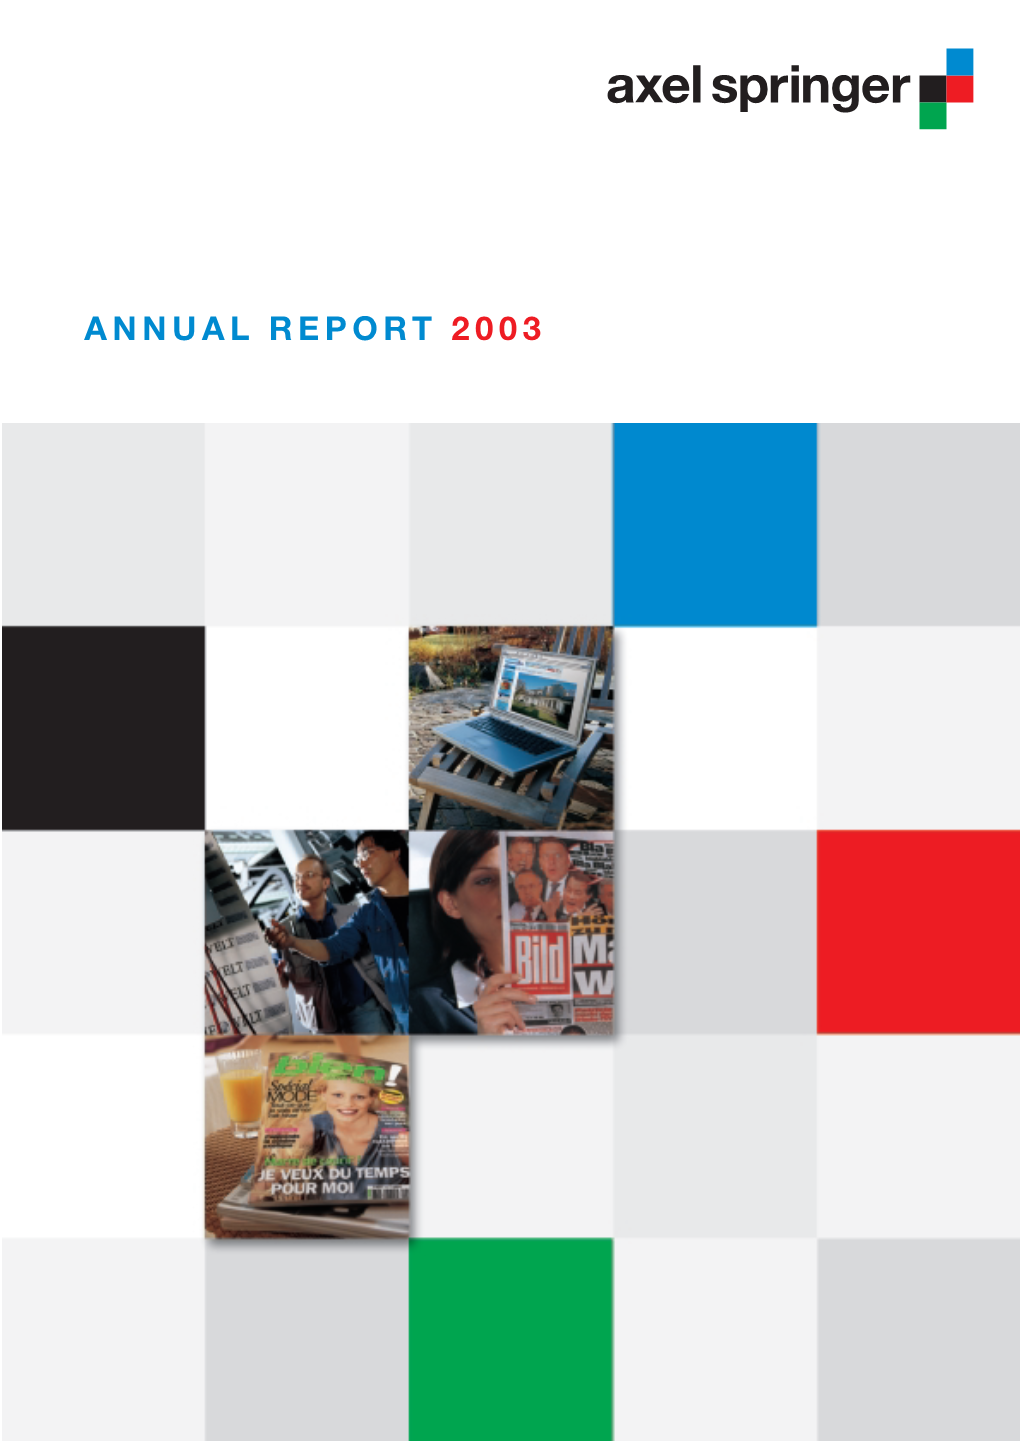 Annual Report 2003 Group Key Data